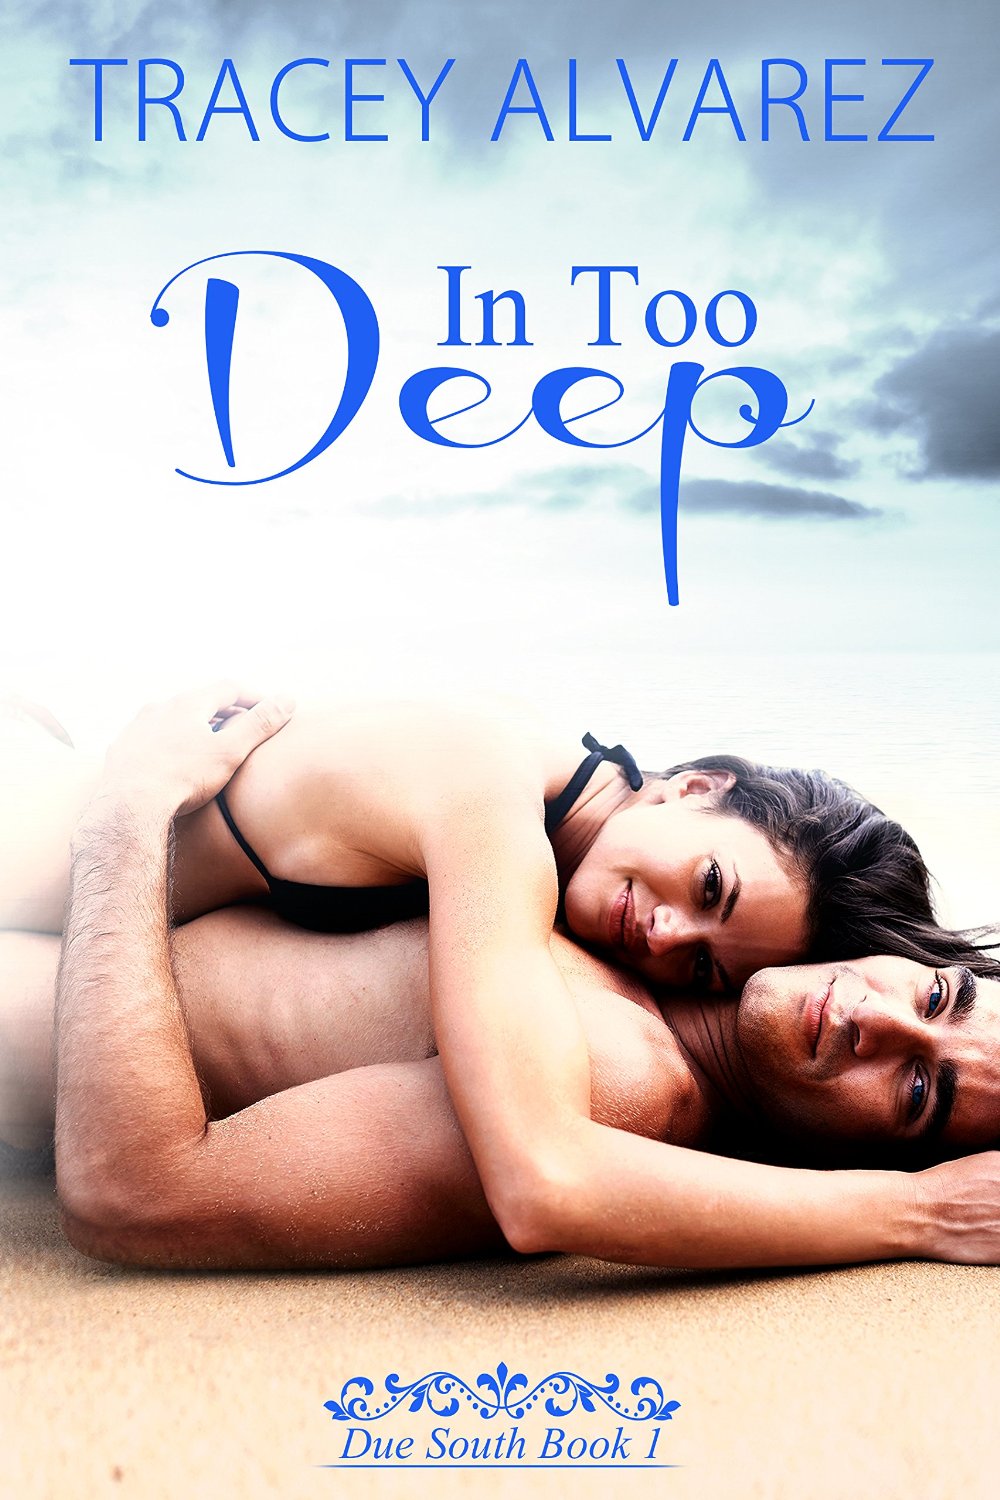 In Too Deep: A New Zealand Second Chances Romance (Due South Series Book 1) by Tracey Alvarez